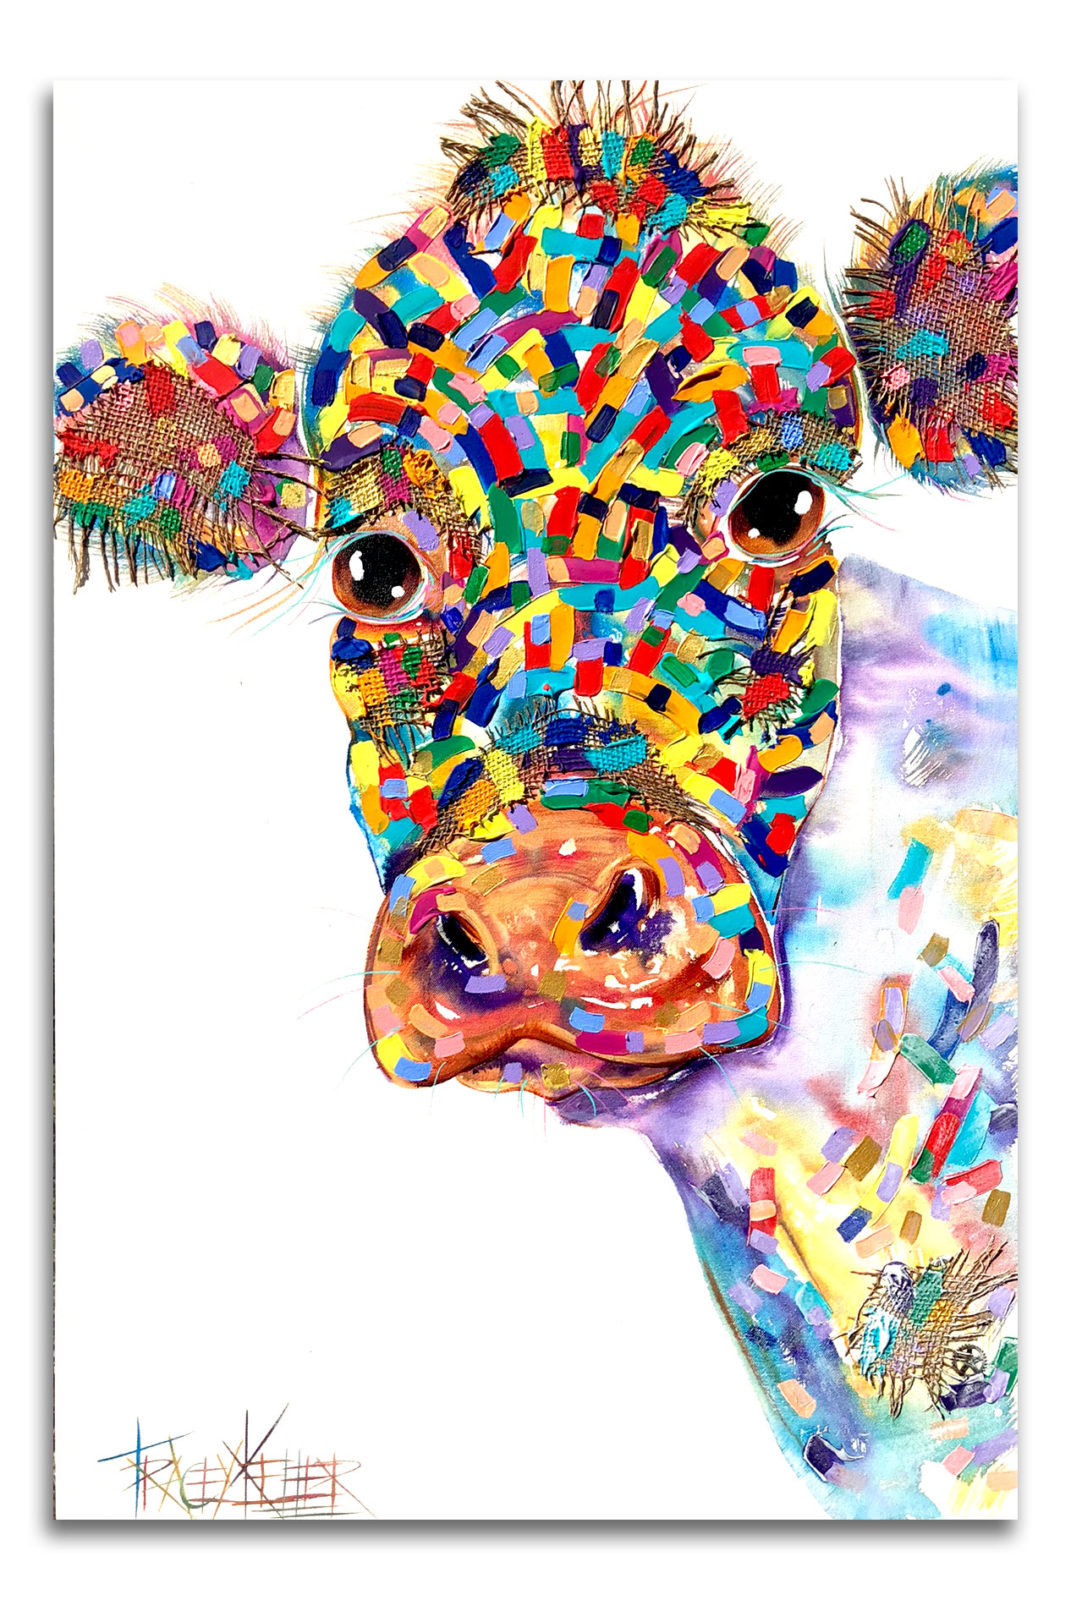 Tracey-Keller-Cow